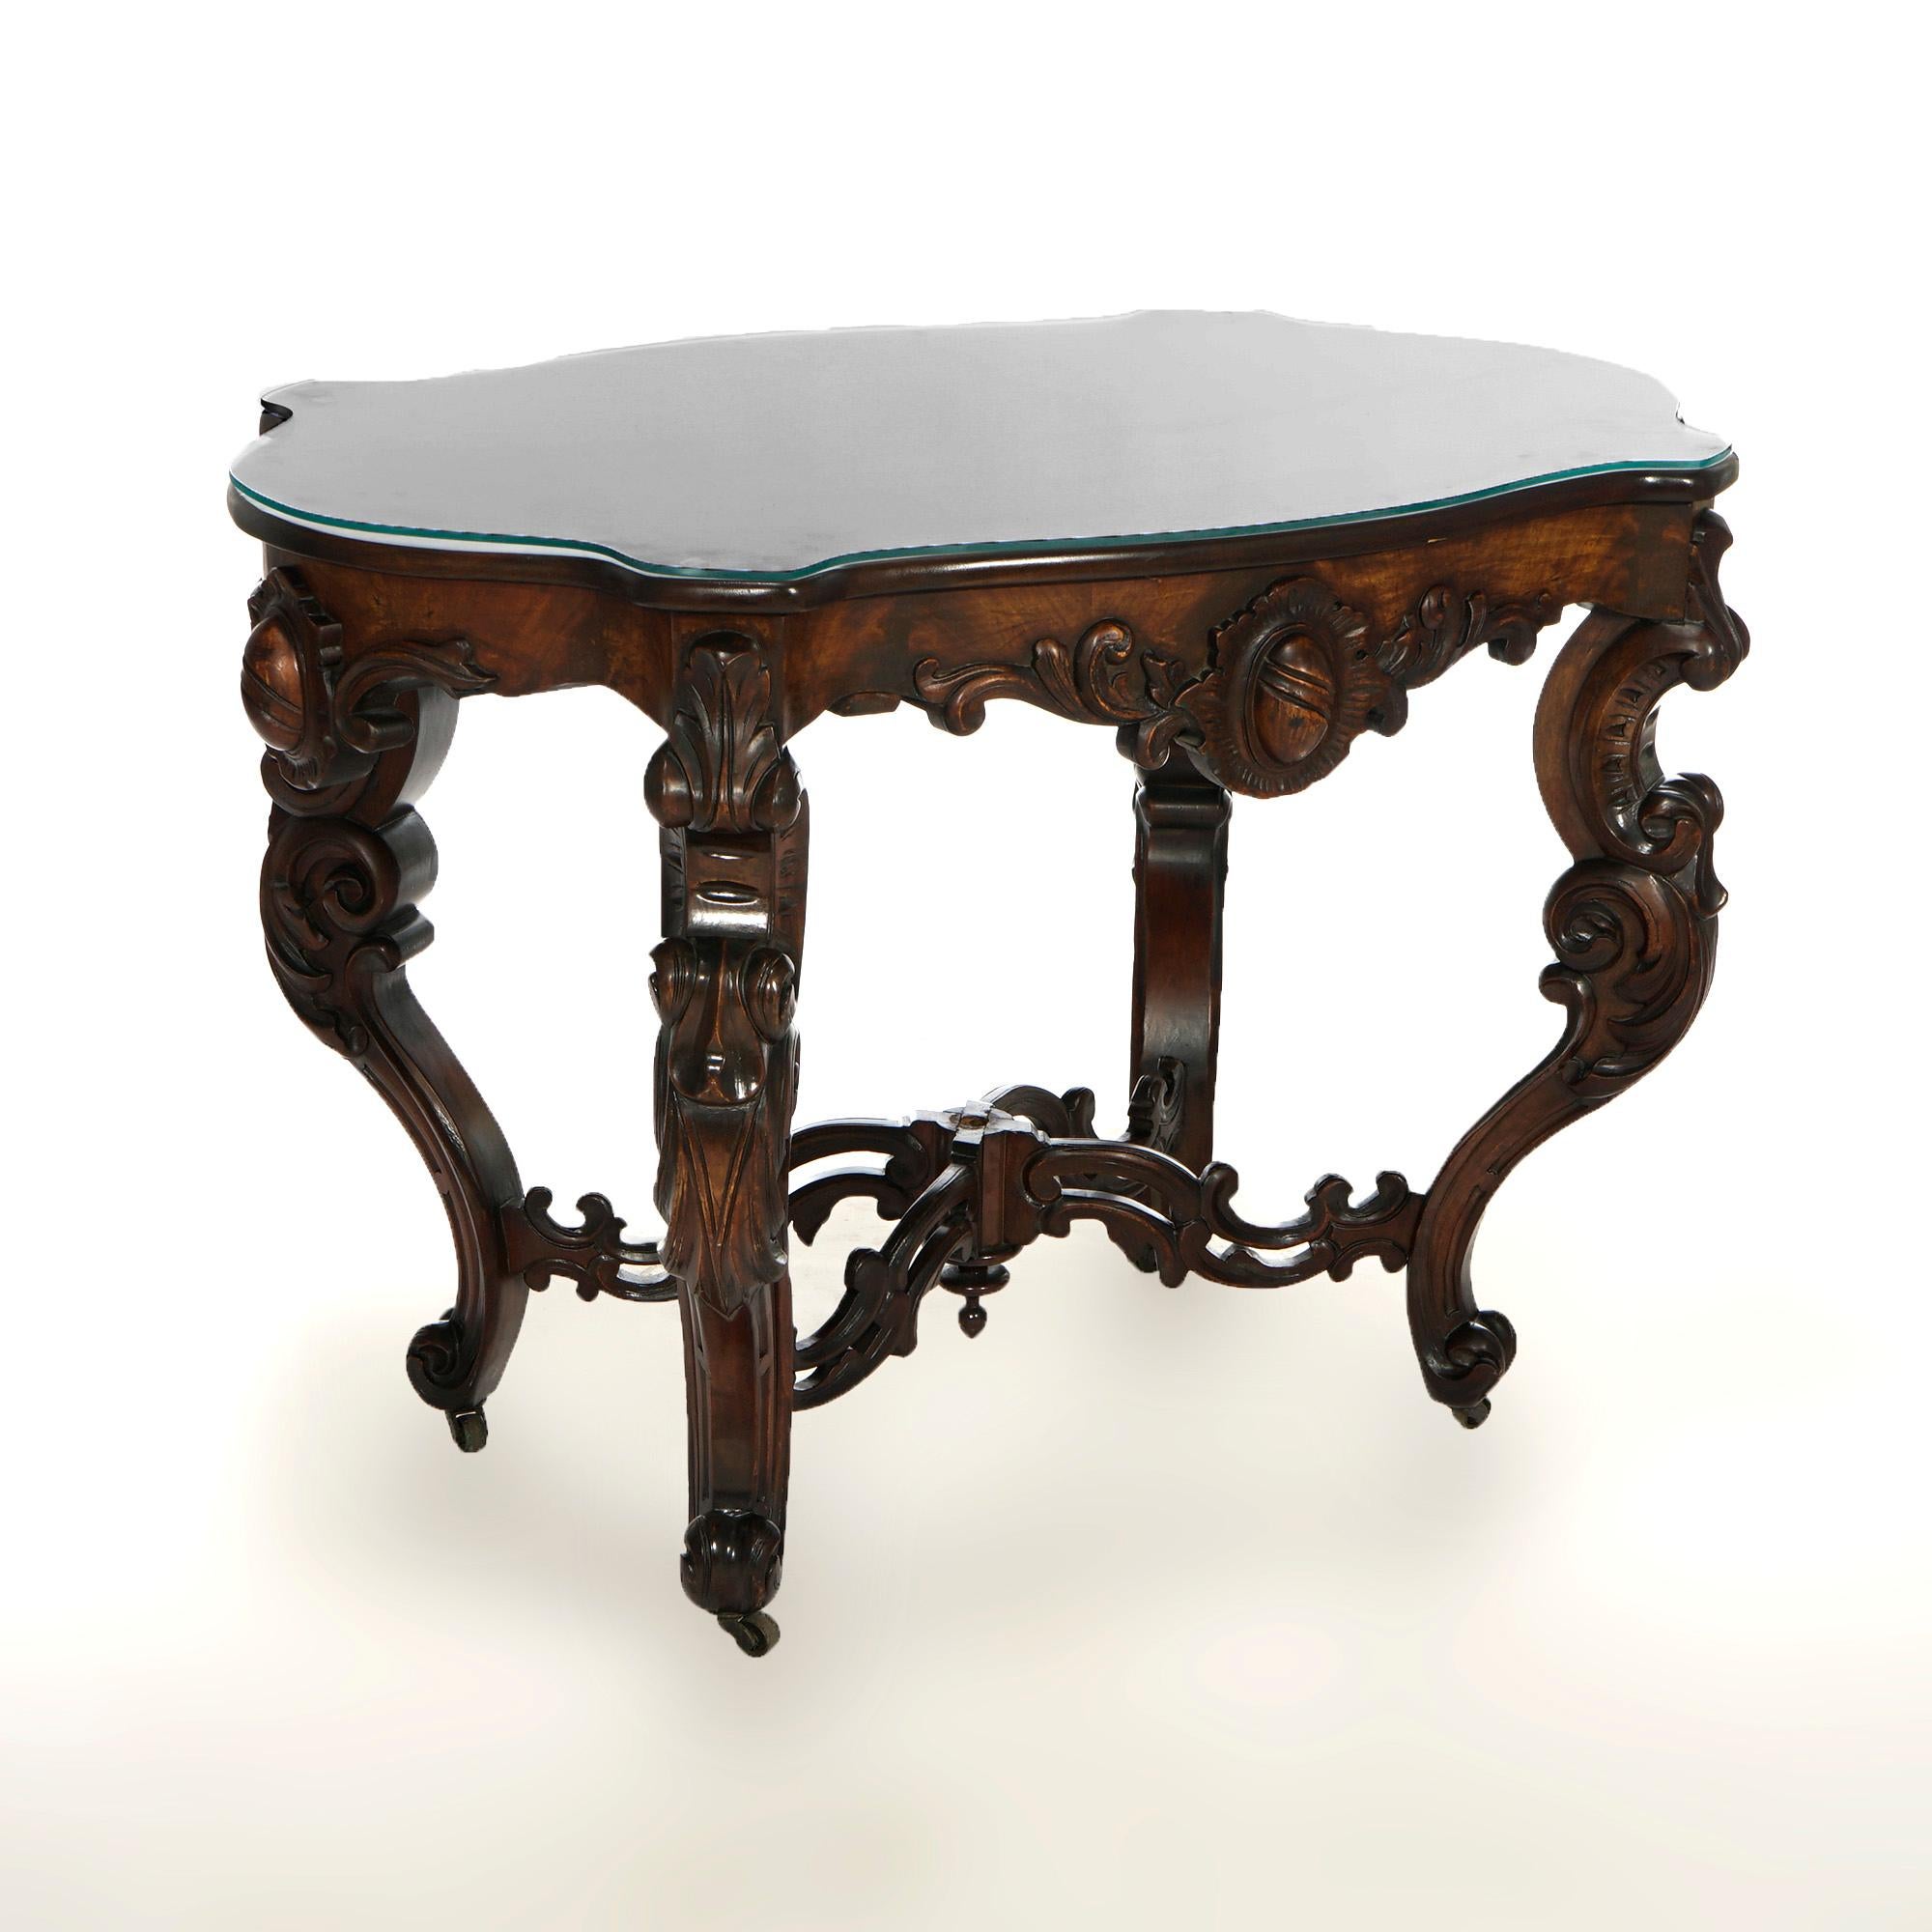 19th Century Antique Rococo Revival Carved Walnut & Marble Turtle Top Parlor Table 19th C